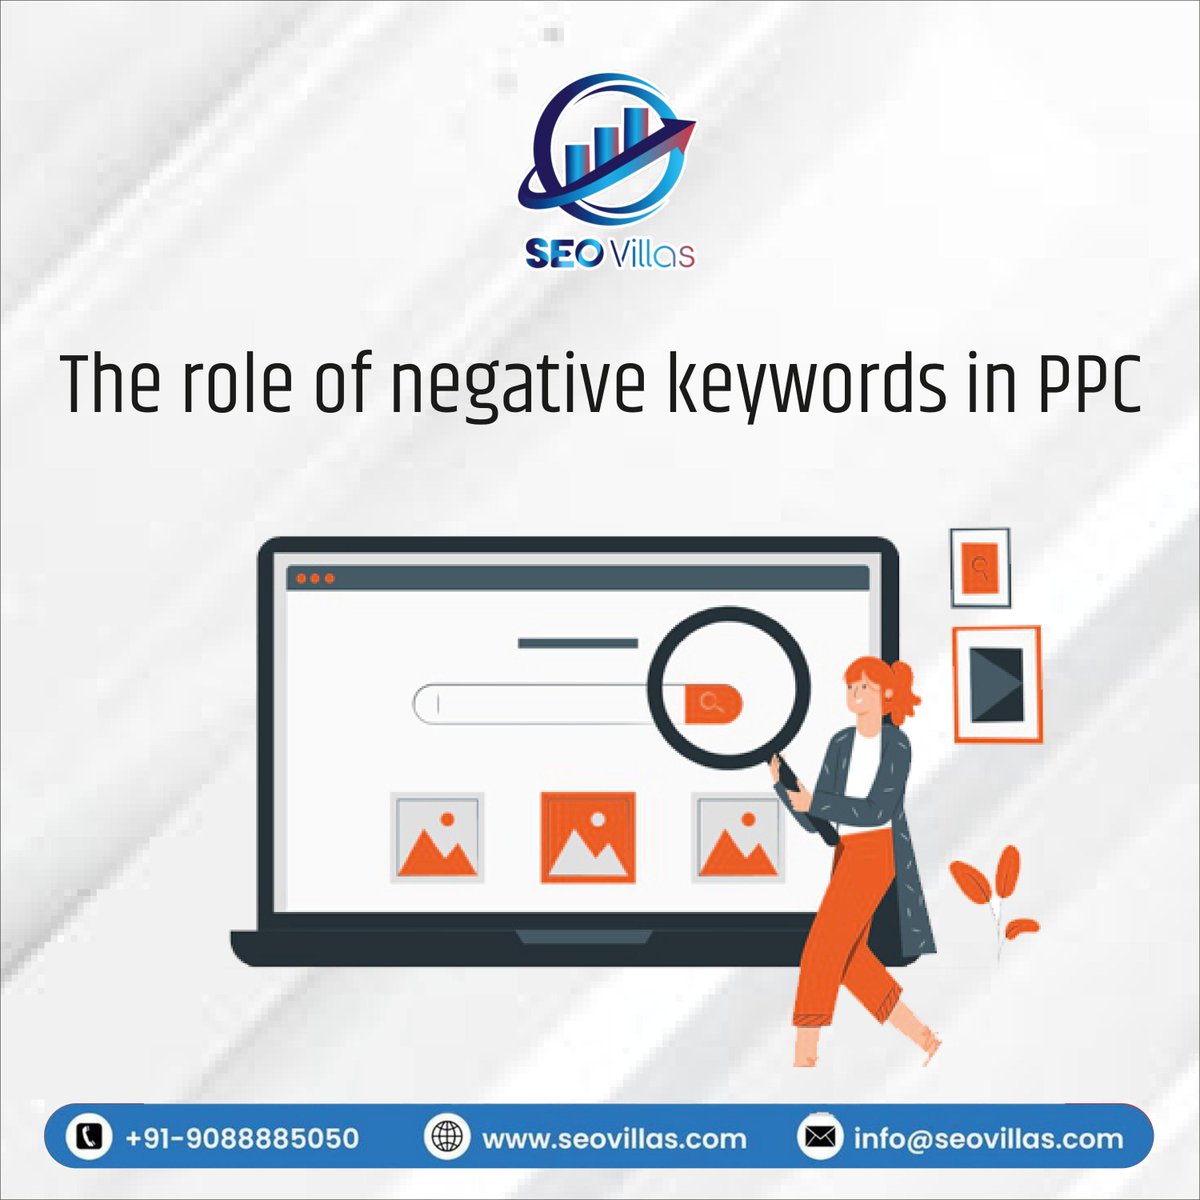 📢 Check out the power of negative keywords in PPC campaigns! 🔍💥 By excluding irrelevant searches, you can maximize your ad's visibility to the right audience. 🎯 Don't waste budget on non-converting clicks! 🚫💸 #PPCtips #NegativeKeywords #AdVisibility #TargetedAdvertising